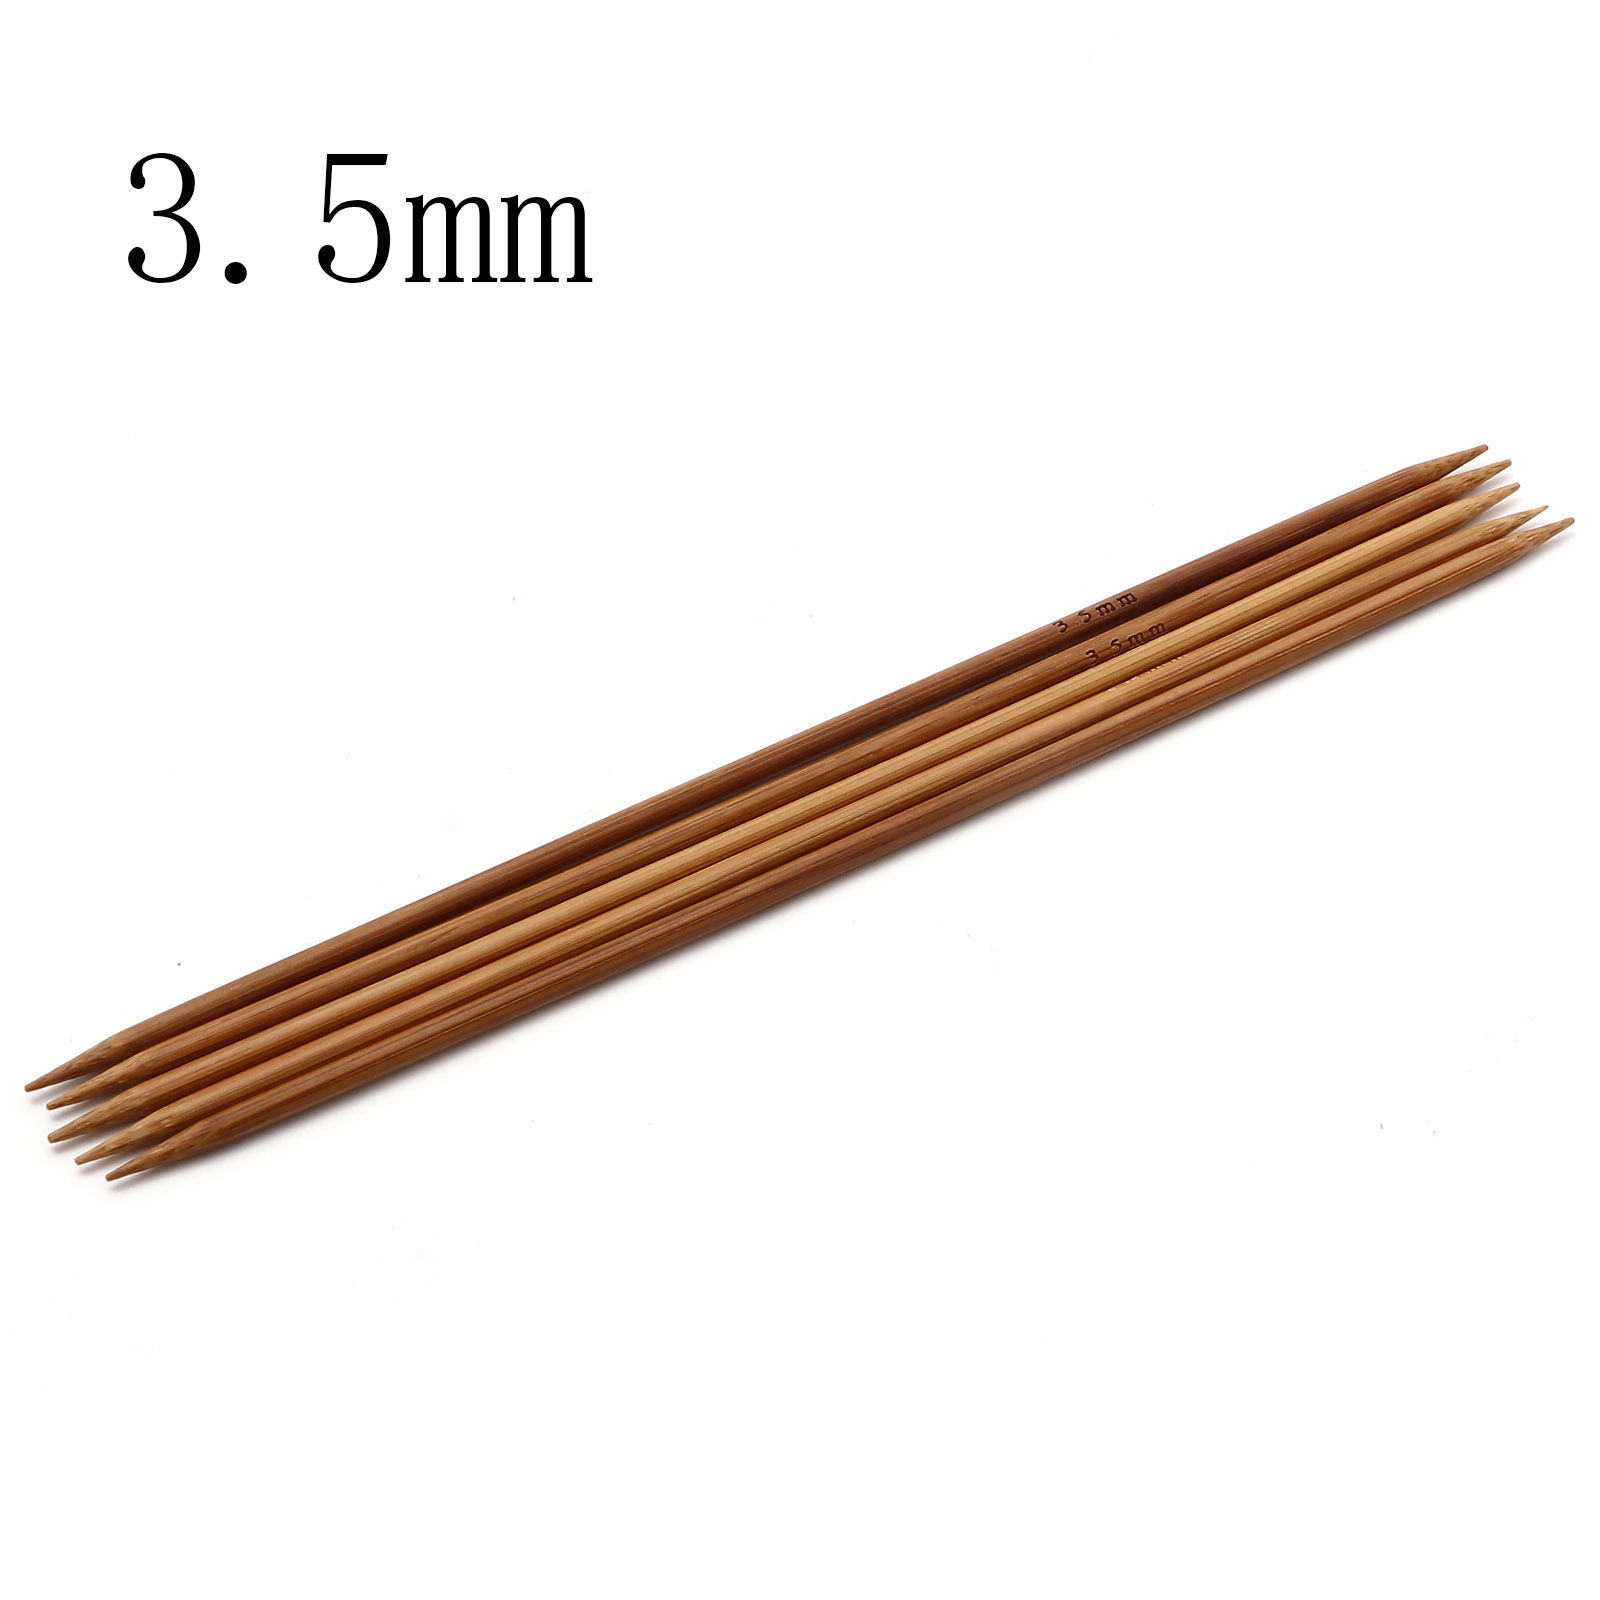 Picture of (US4 3.5mm) Bamboo Double Pointed Knitting Needles Brown 20cm(7 7/8") long, 5 PCs